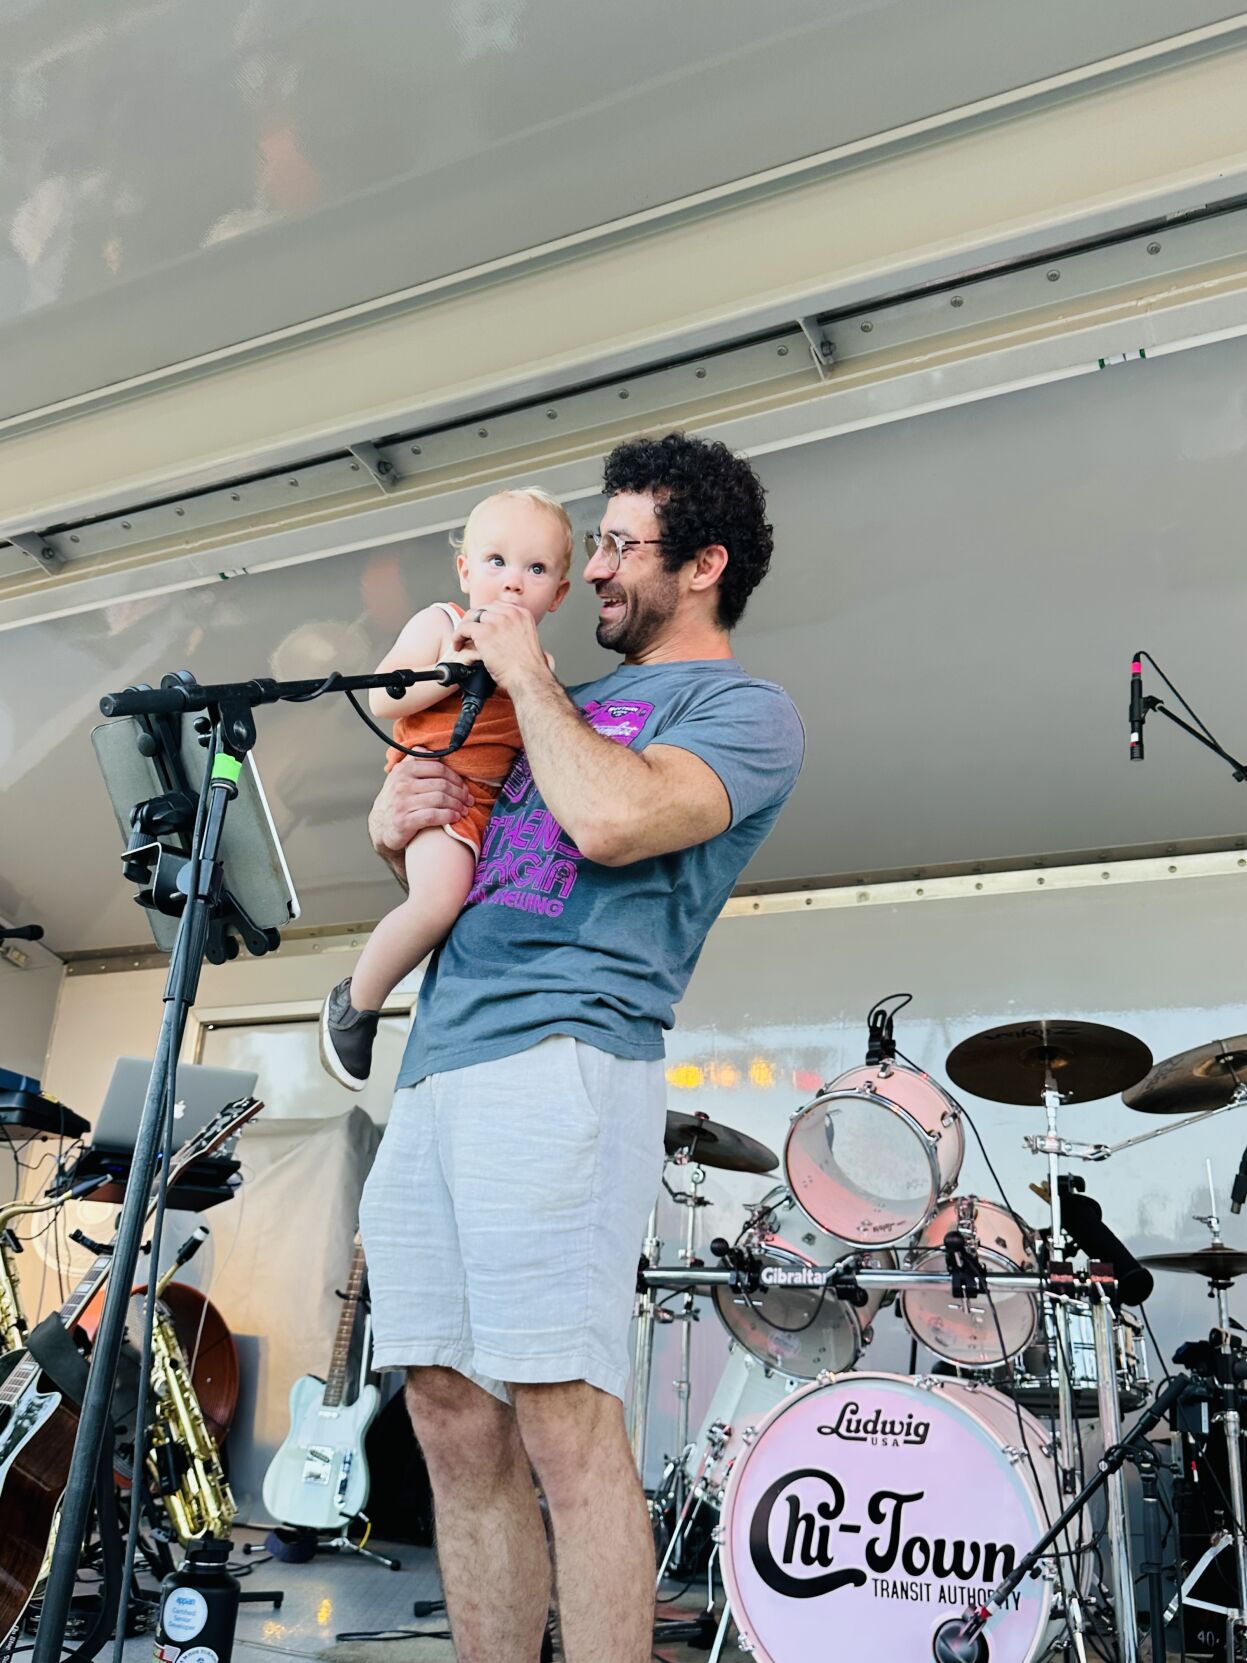 PHOTOS ChiTown Transit Authority plays Snellville Summer Concert